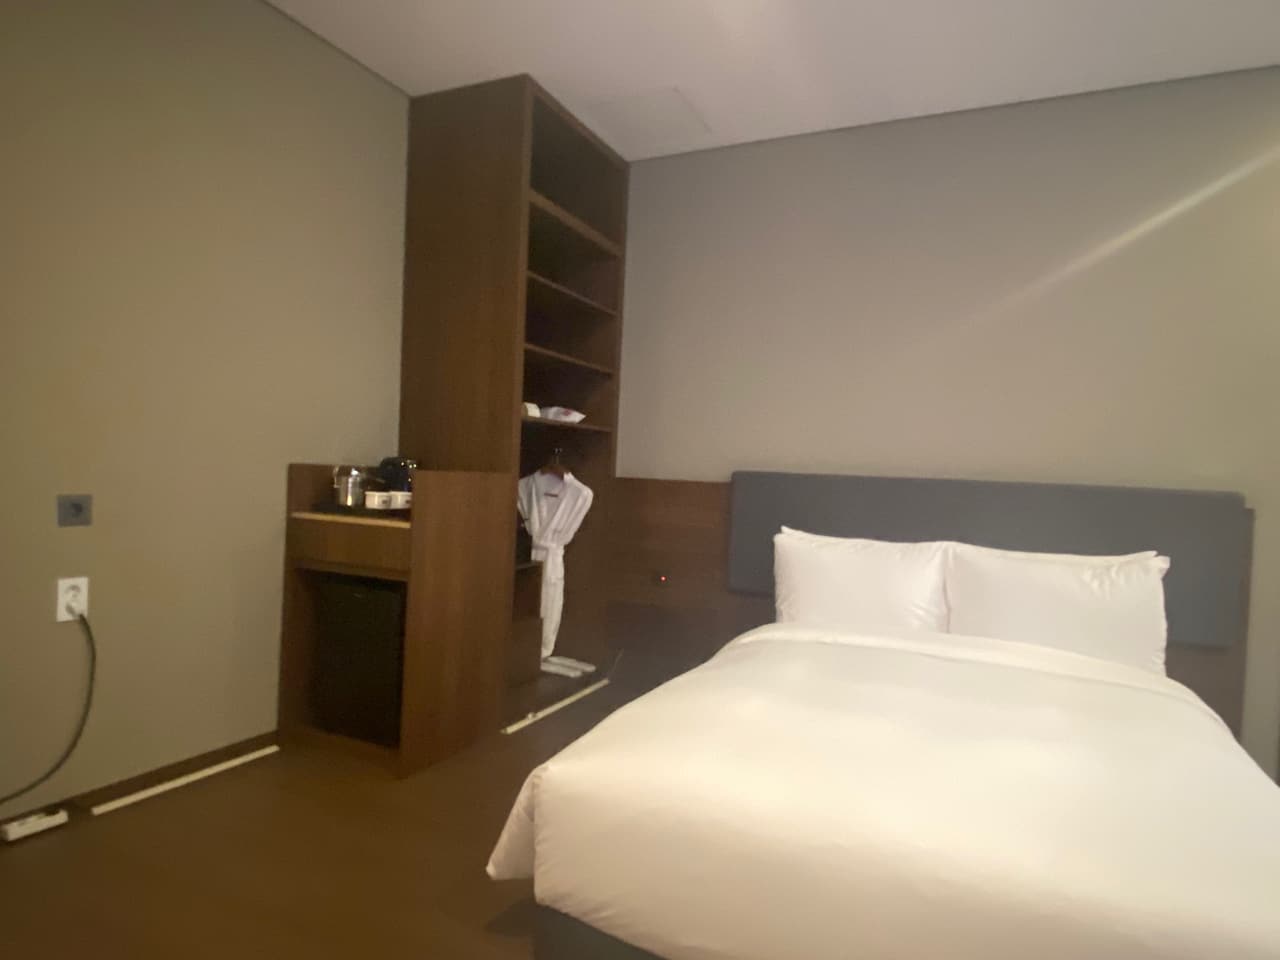 Accessible guestroom0 : A bed and a high wardrobe in the hotel room